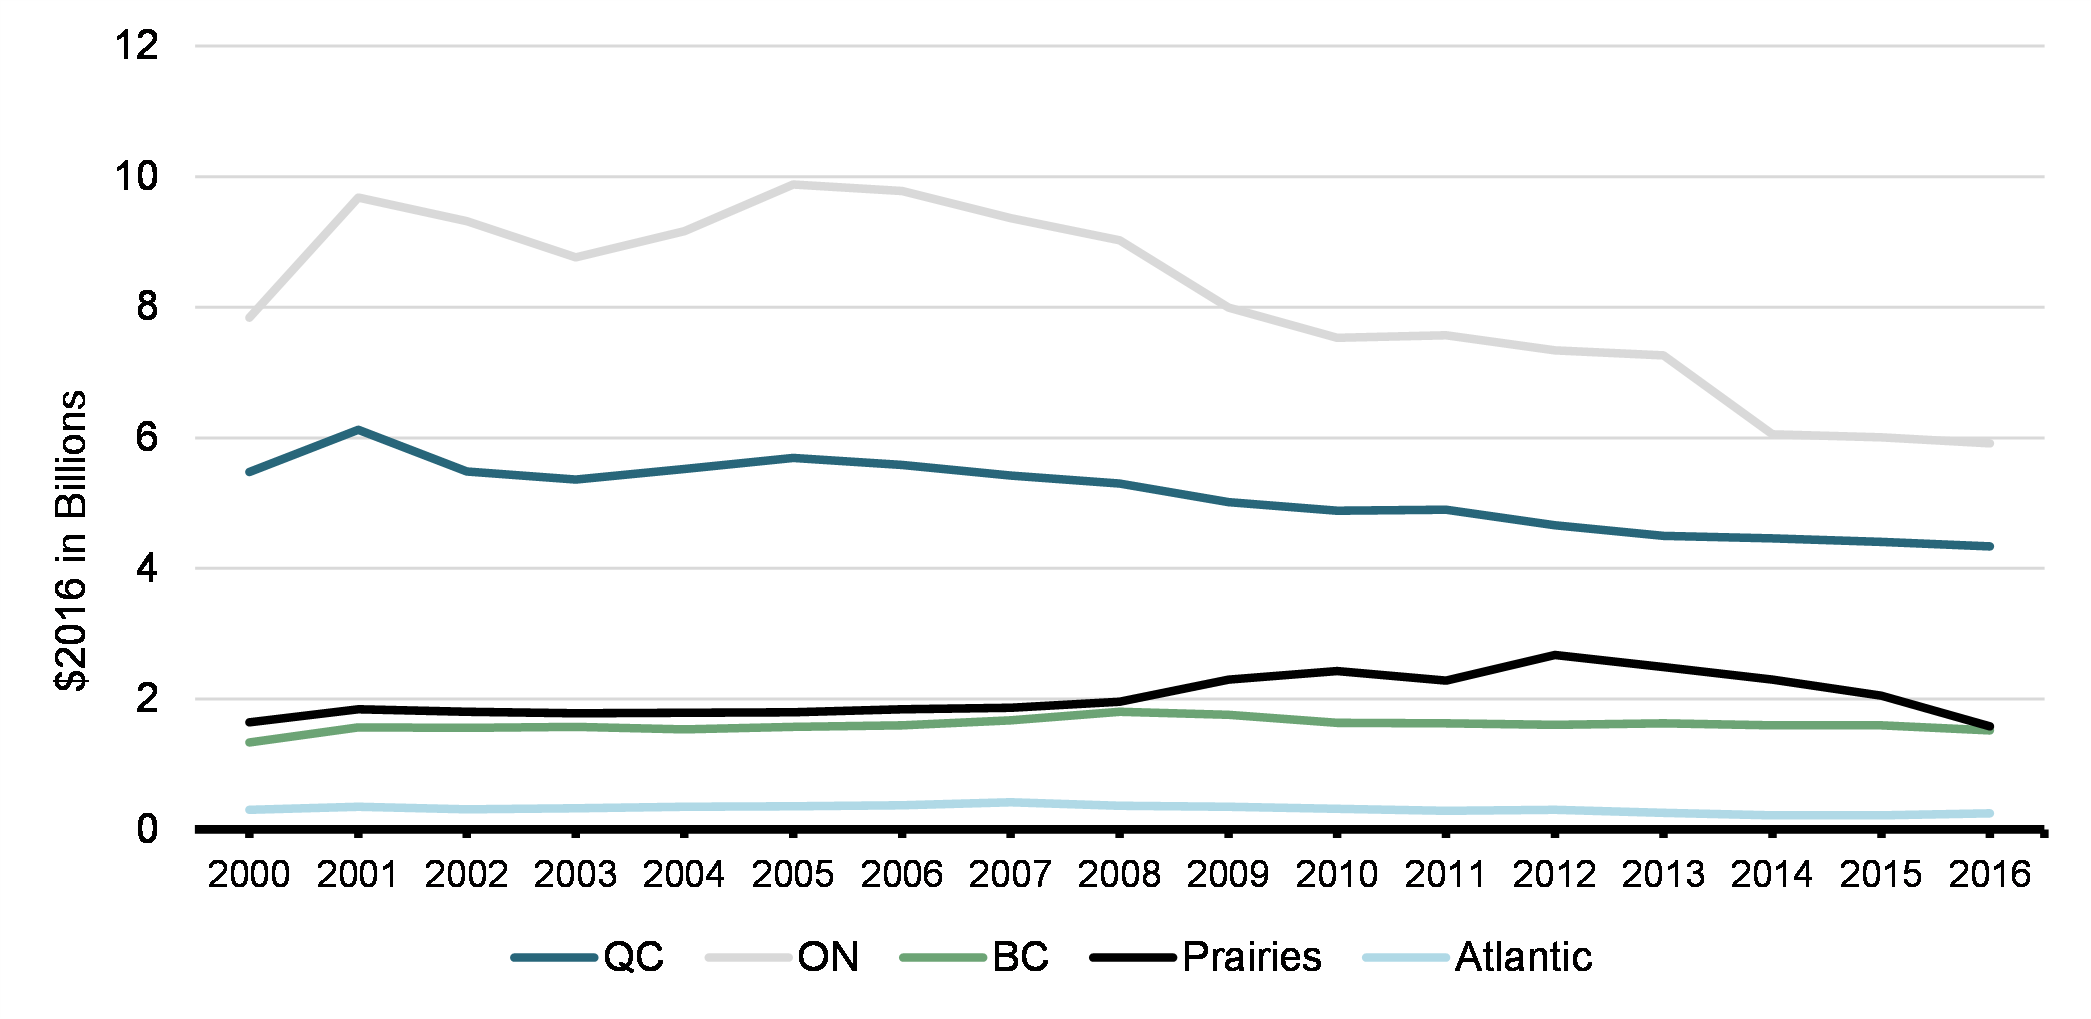 Chart 5: SR&ED Expenditures by Province, 2000-2016